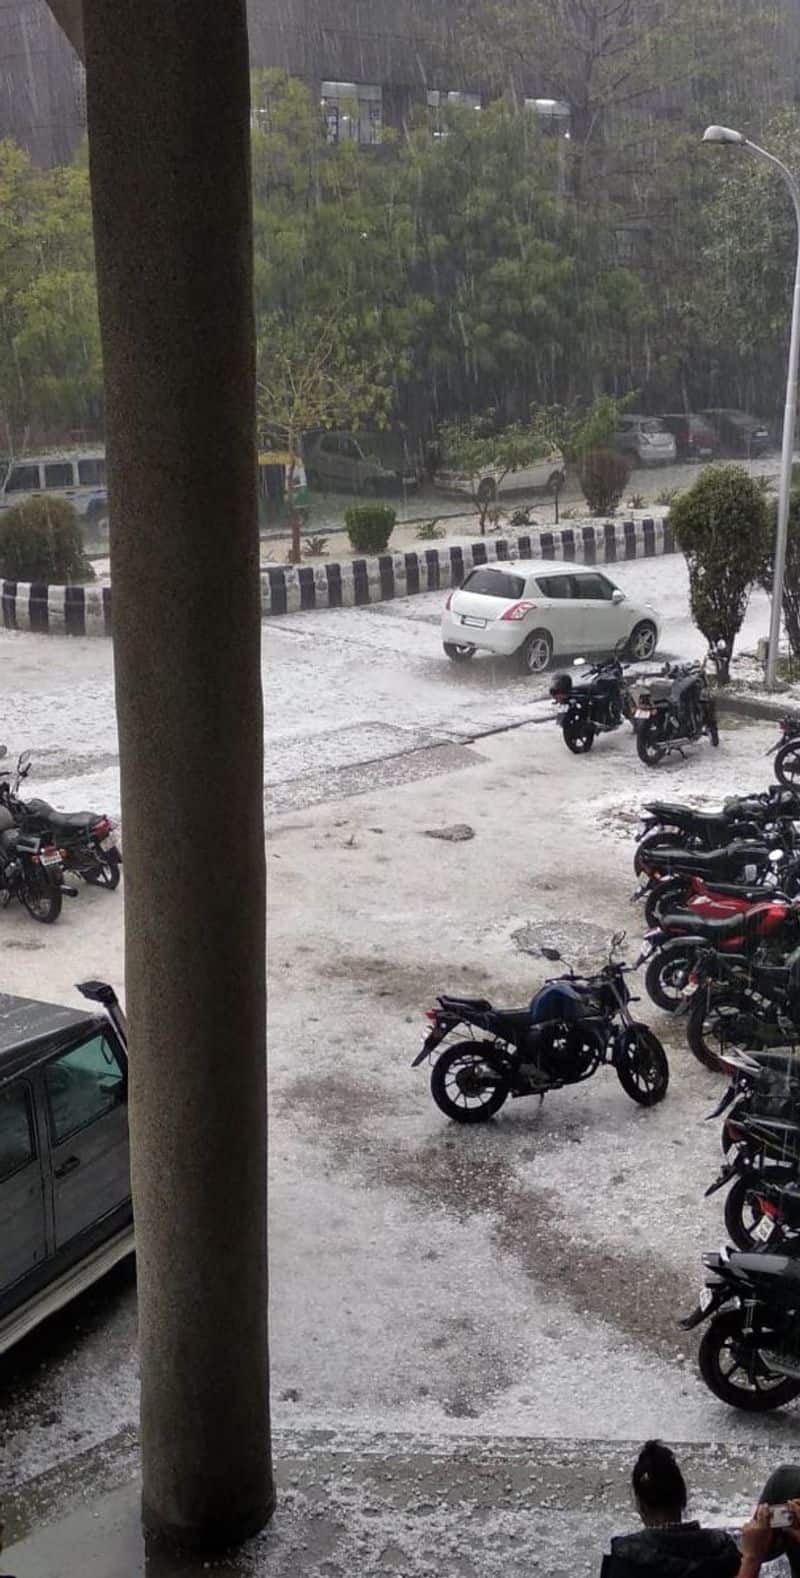 Severe hailfall was witnessed in Noida's Sector 137, 138, 91, 93A, 62, 63, 35, 37, 71, 75, 76, 77, 121, 122 and 123 and other sectors near the Noida Greater Noida expressway.